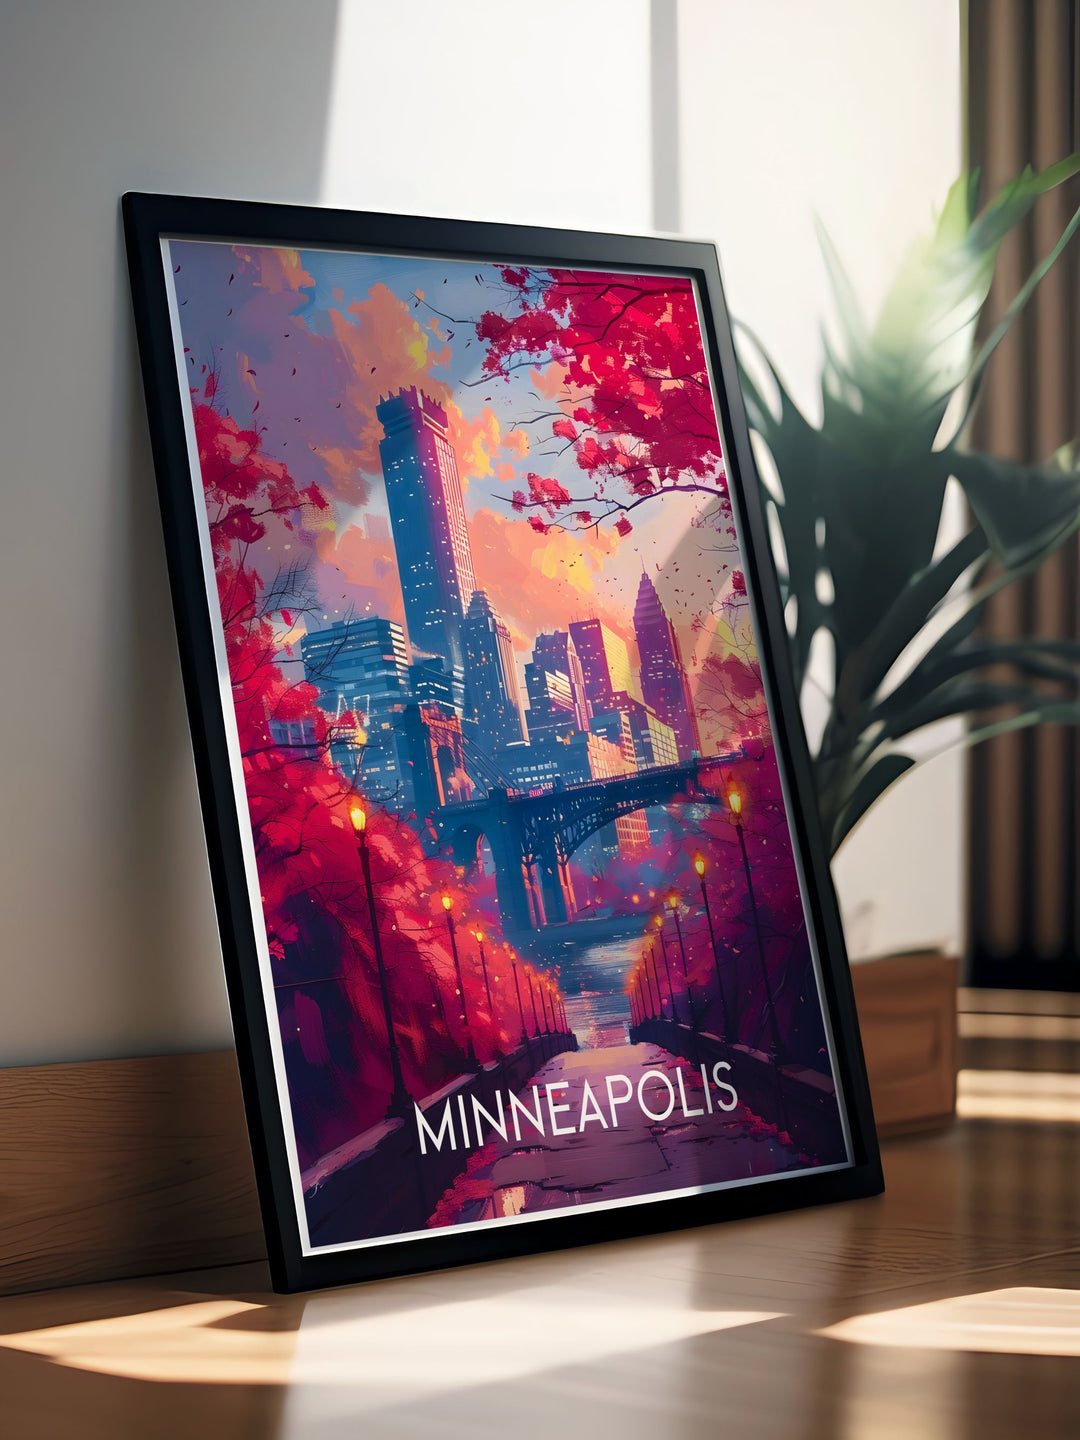 This travel poster of the Minneapolis Skyline captures the modern architectural beauty and vibrant urban life, perfect for bringing city charm into your home decor.